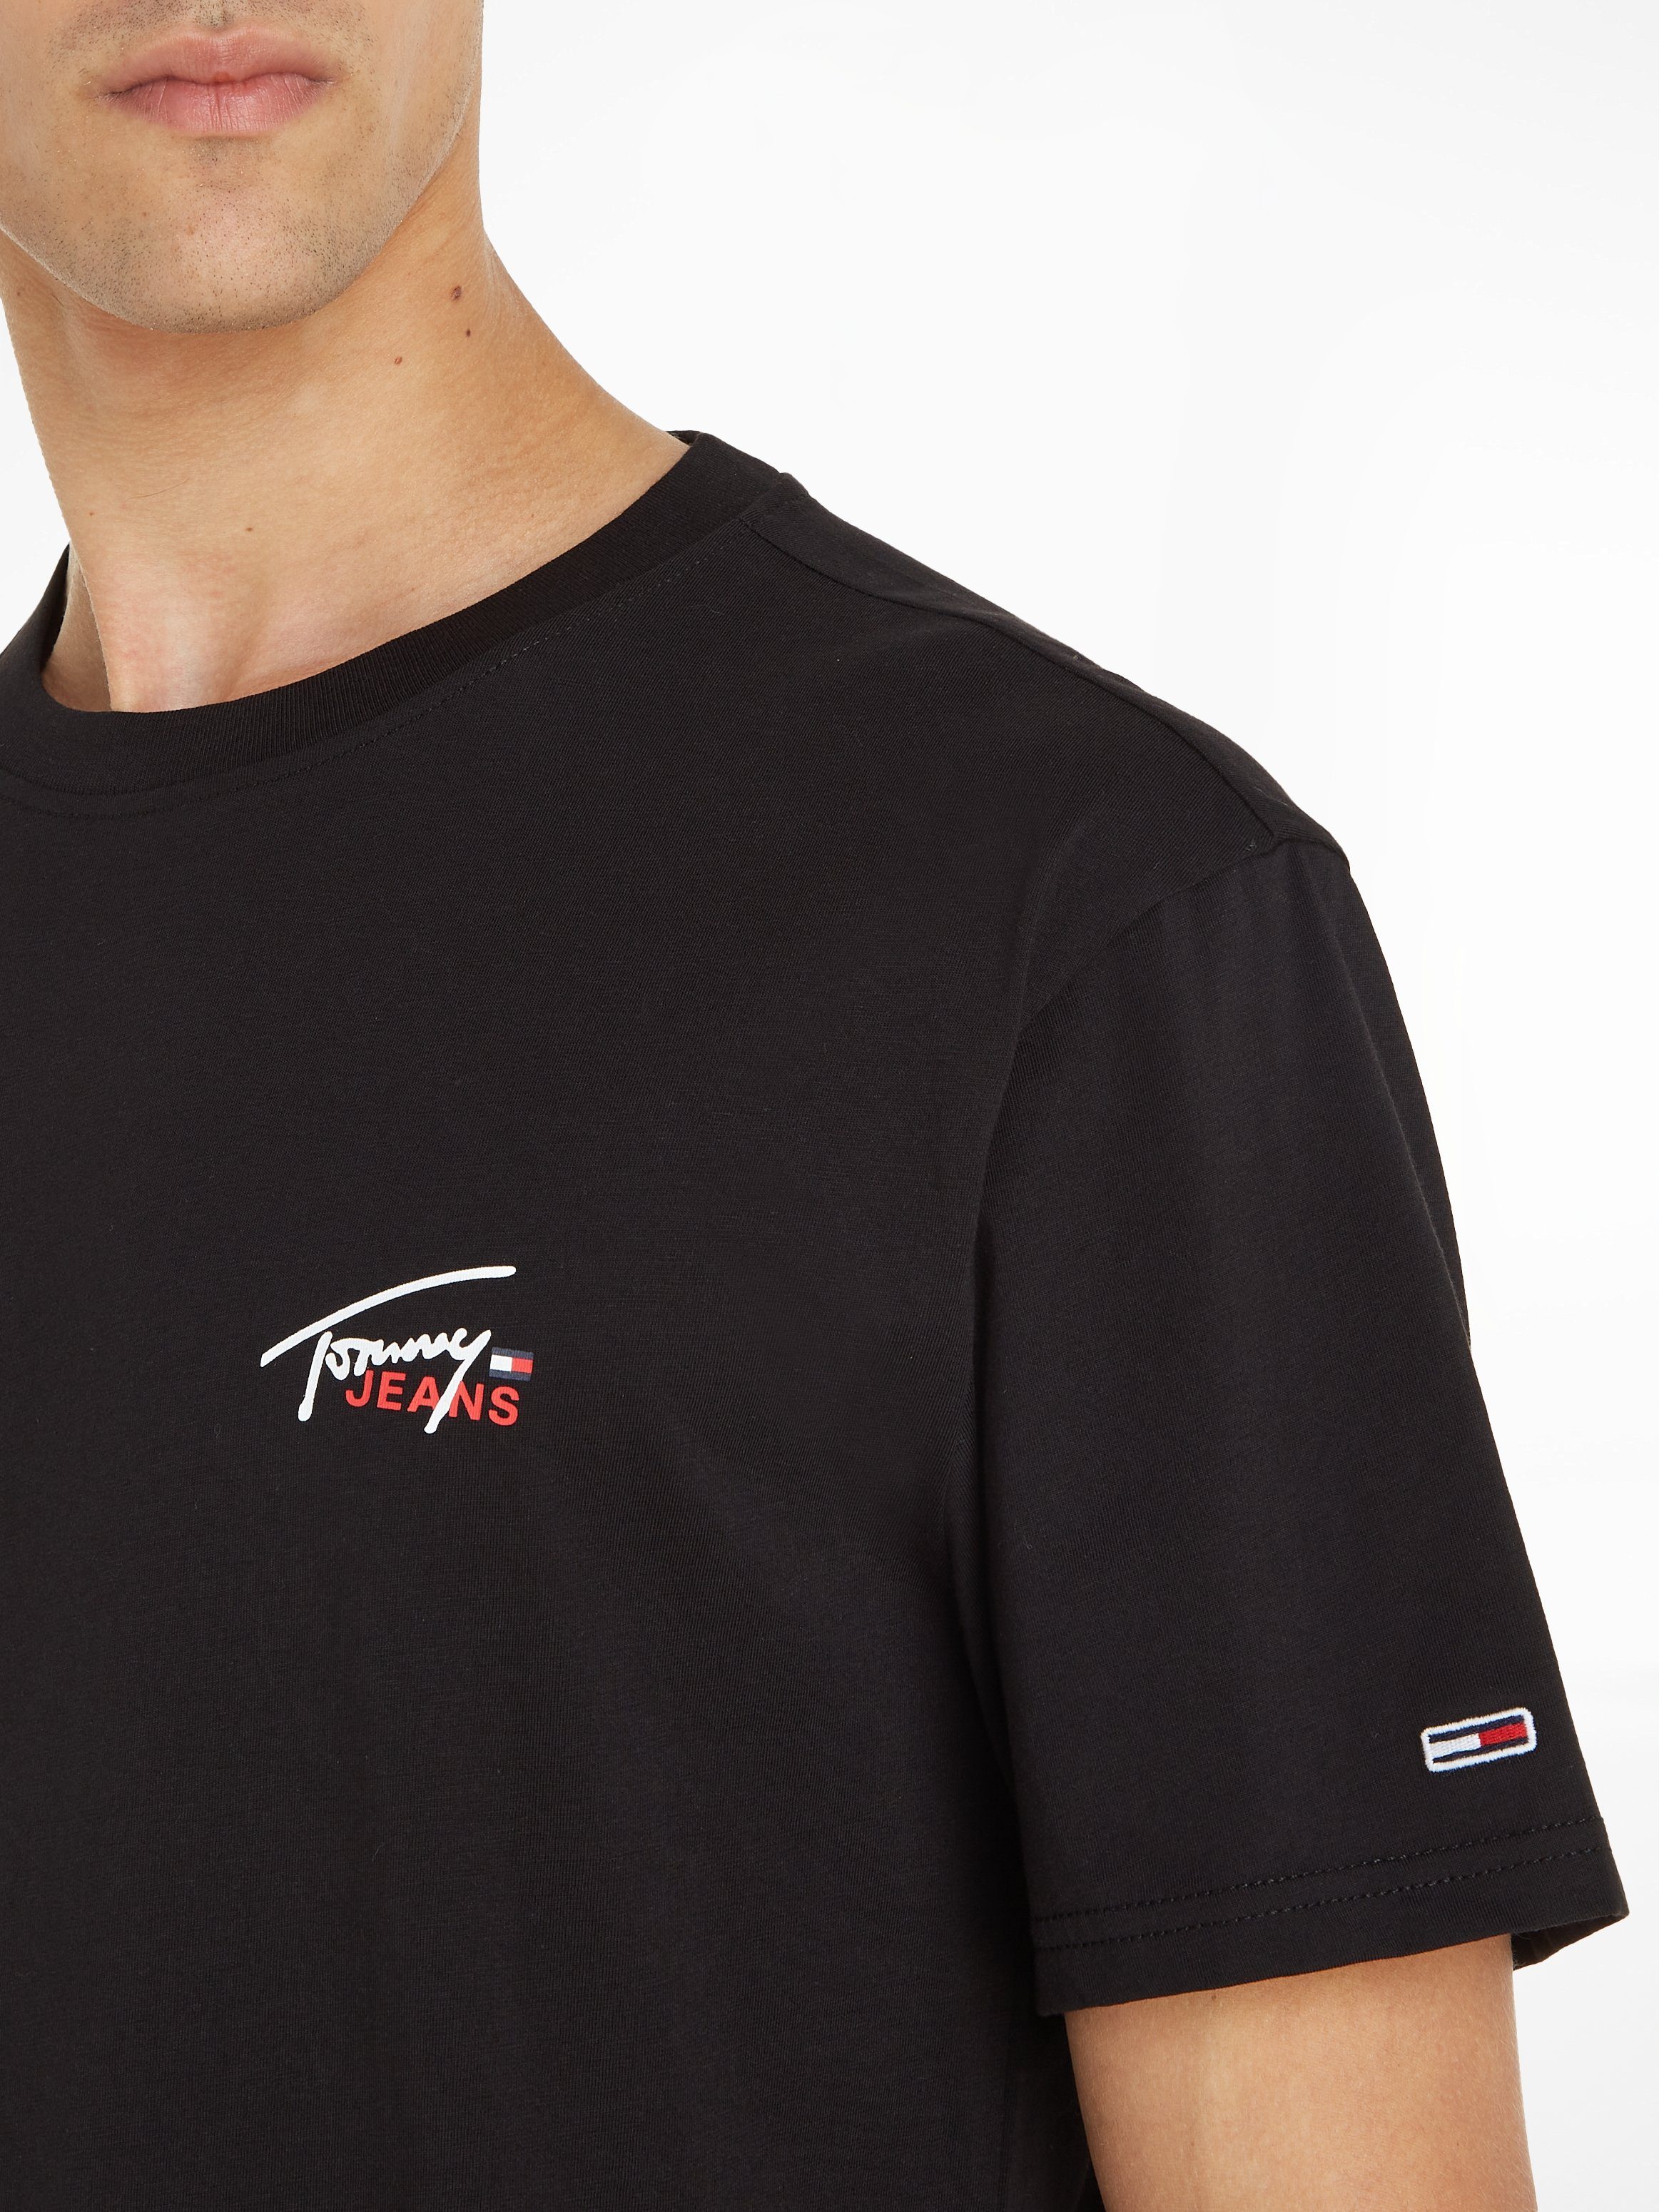 TEE Tommy CLSC TJM FLAG Jeans SMALL Black T-Shirt